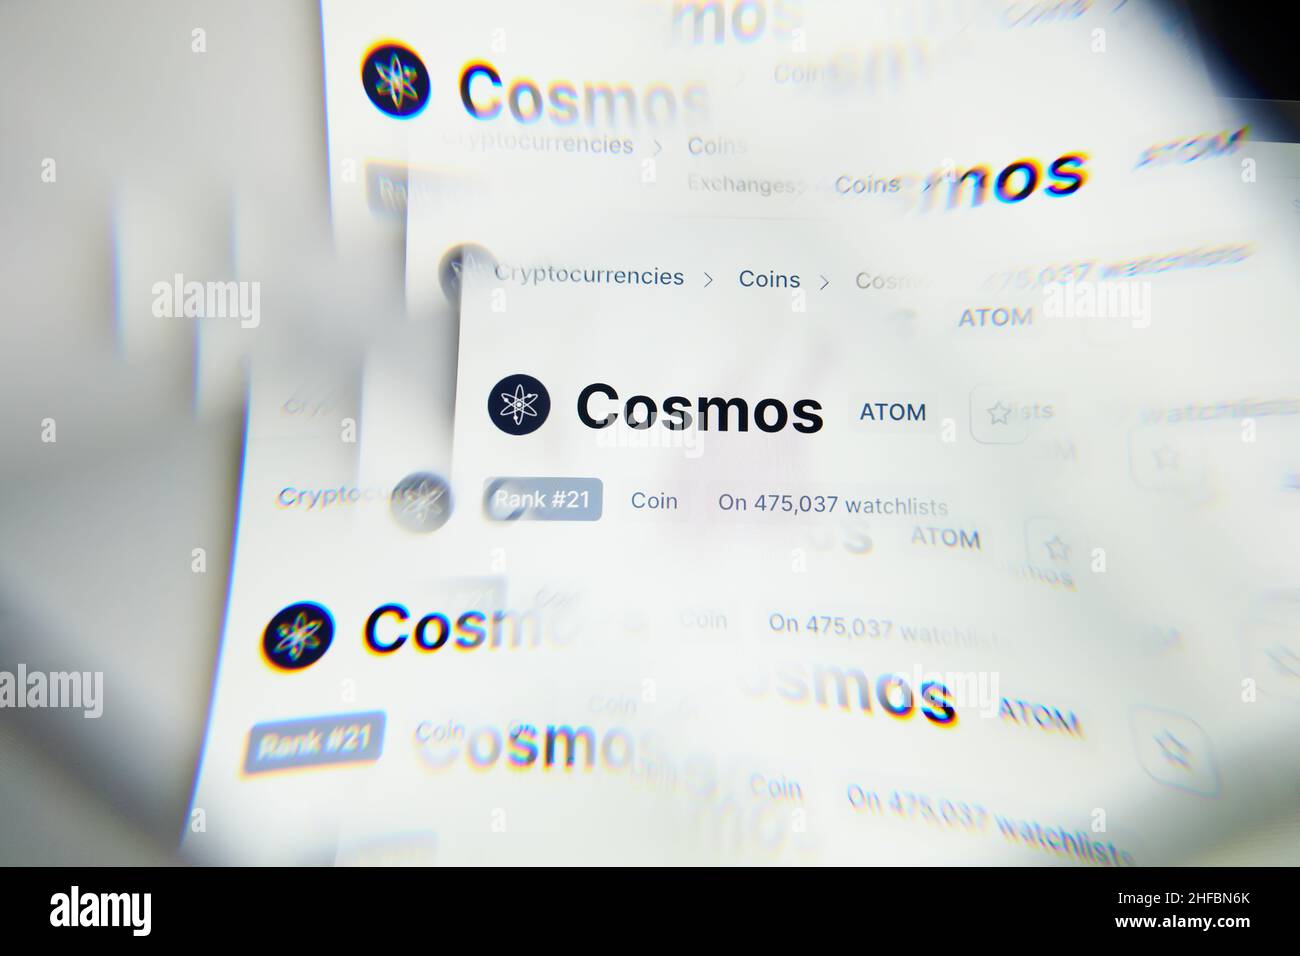 Milan, Italy - January 11, 2022: cosmos - ATOM logo on laptop screen seen through an optical prism. Dynamic and unique image form cosmos, ATOM coin we Stock Photo